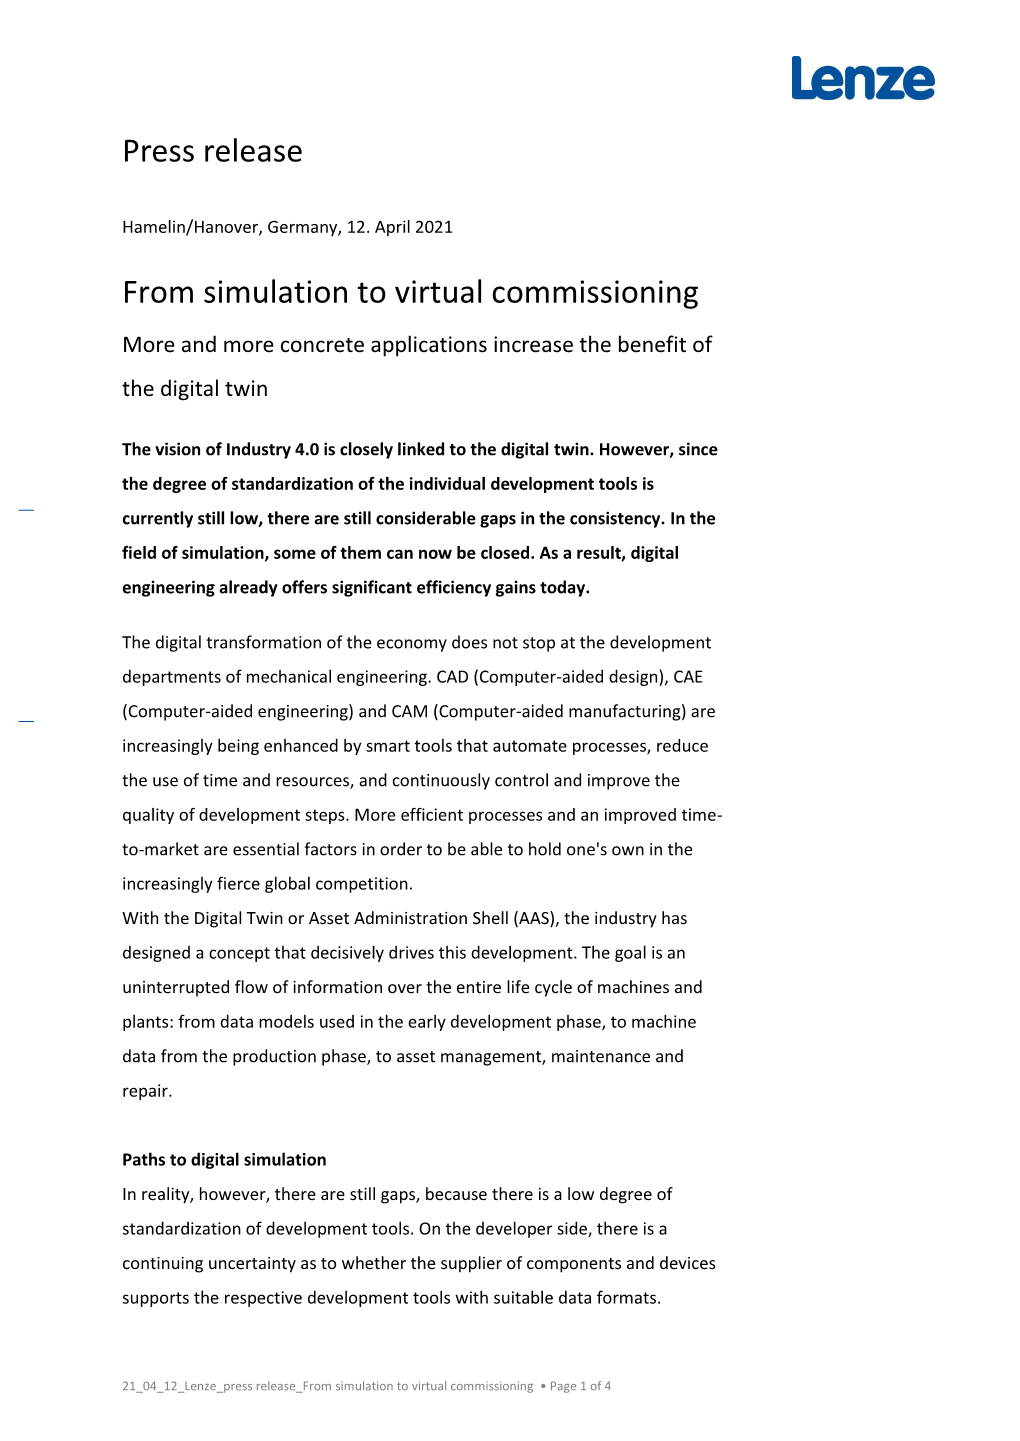 Press Release from Simulation to Virtual Commissioning